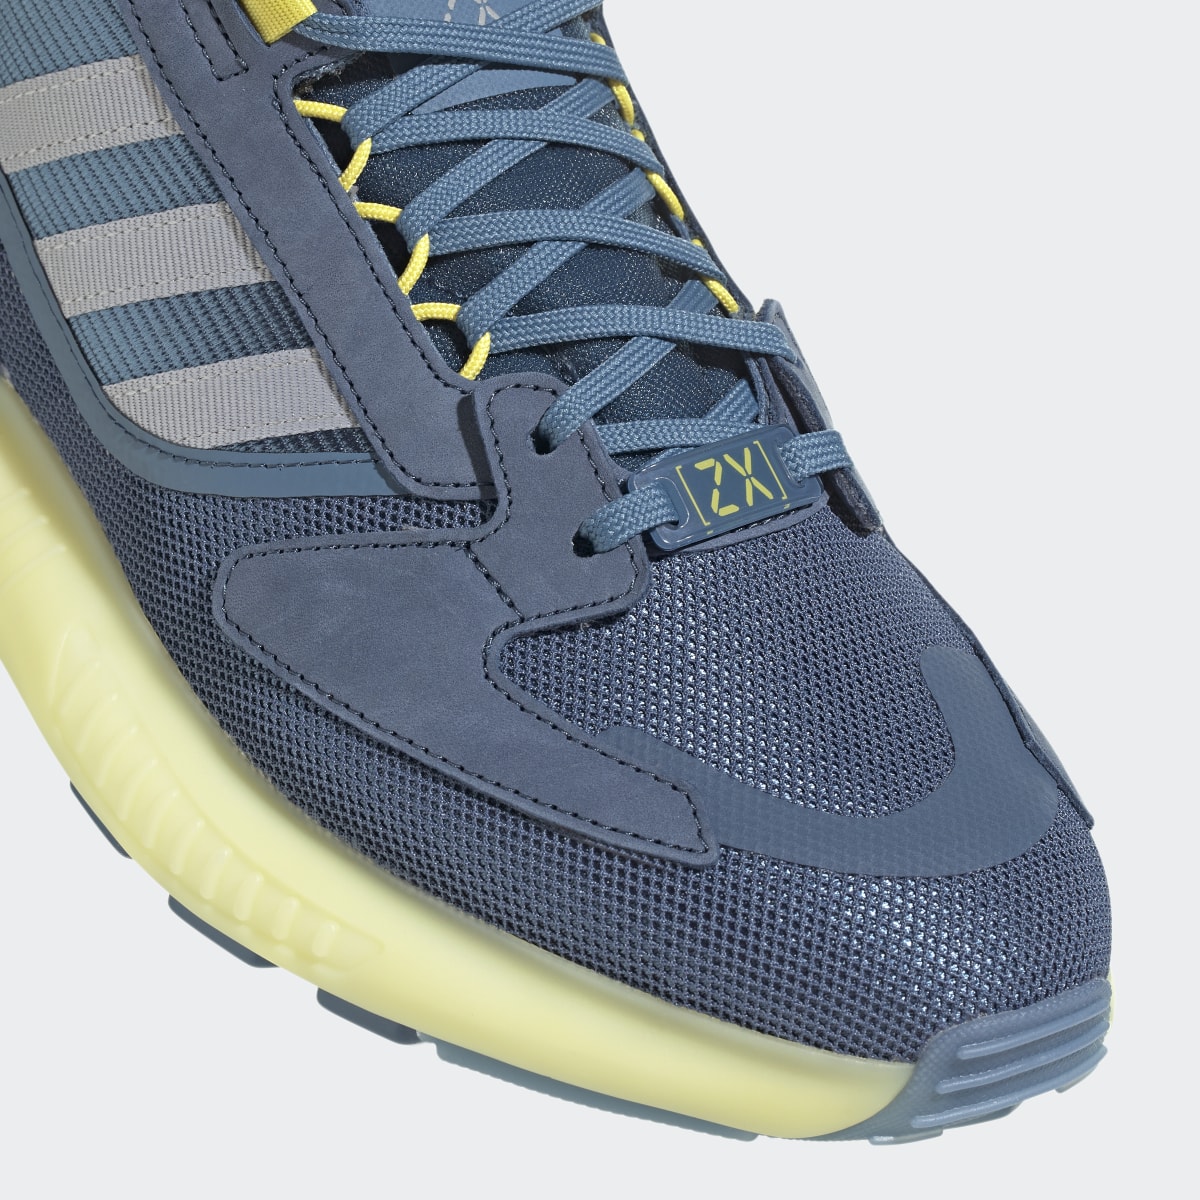 Adidas ZX 5K BOOST Shoes. 9